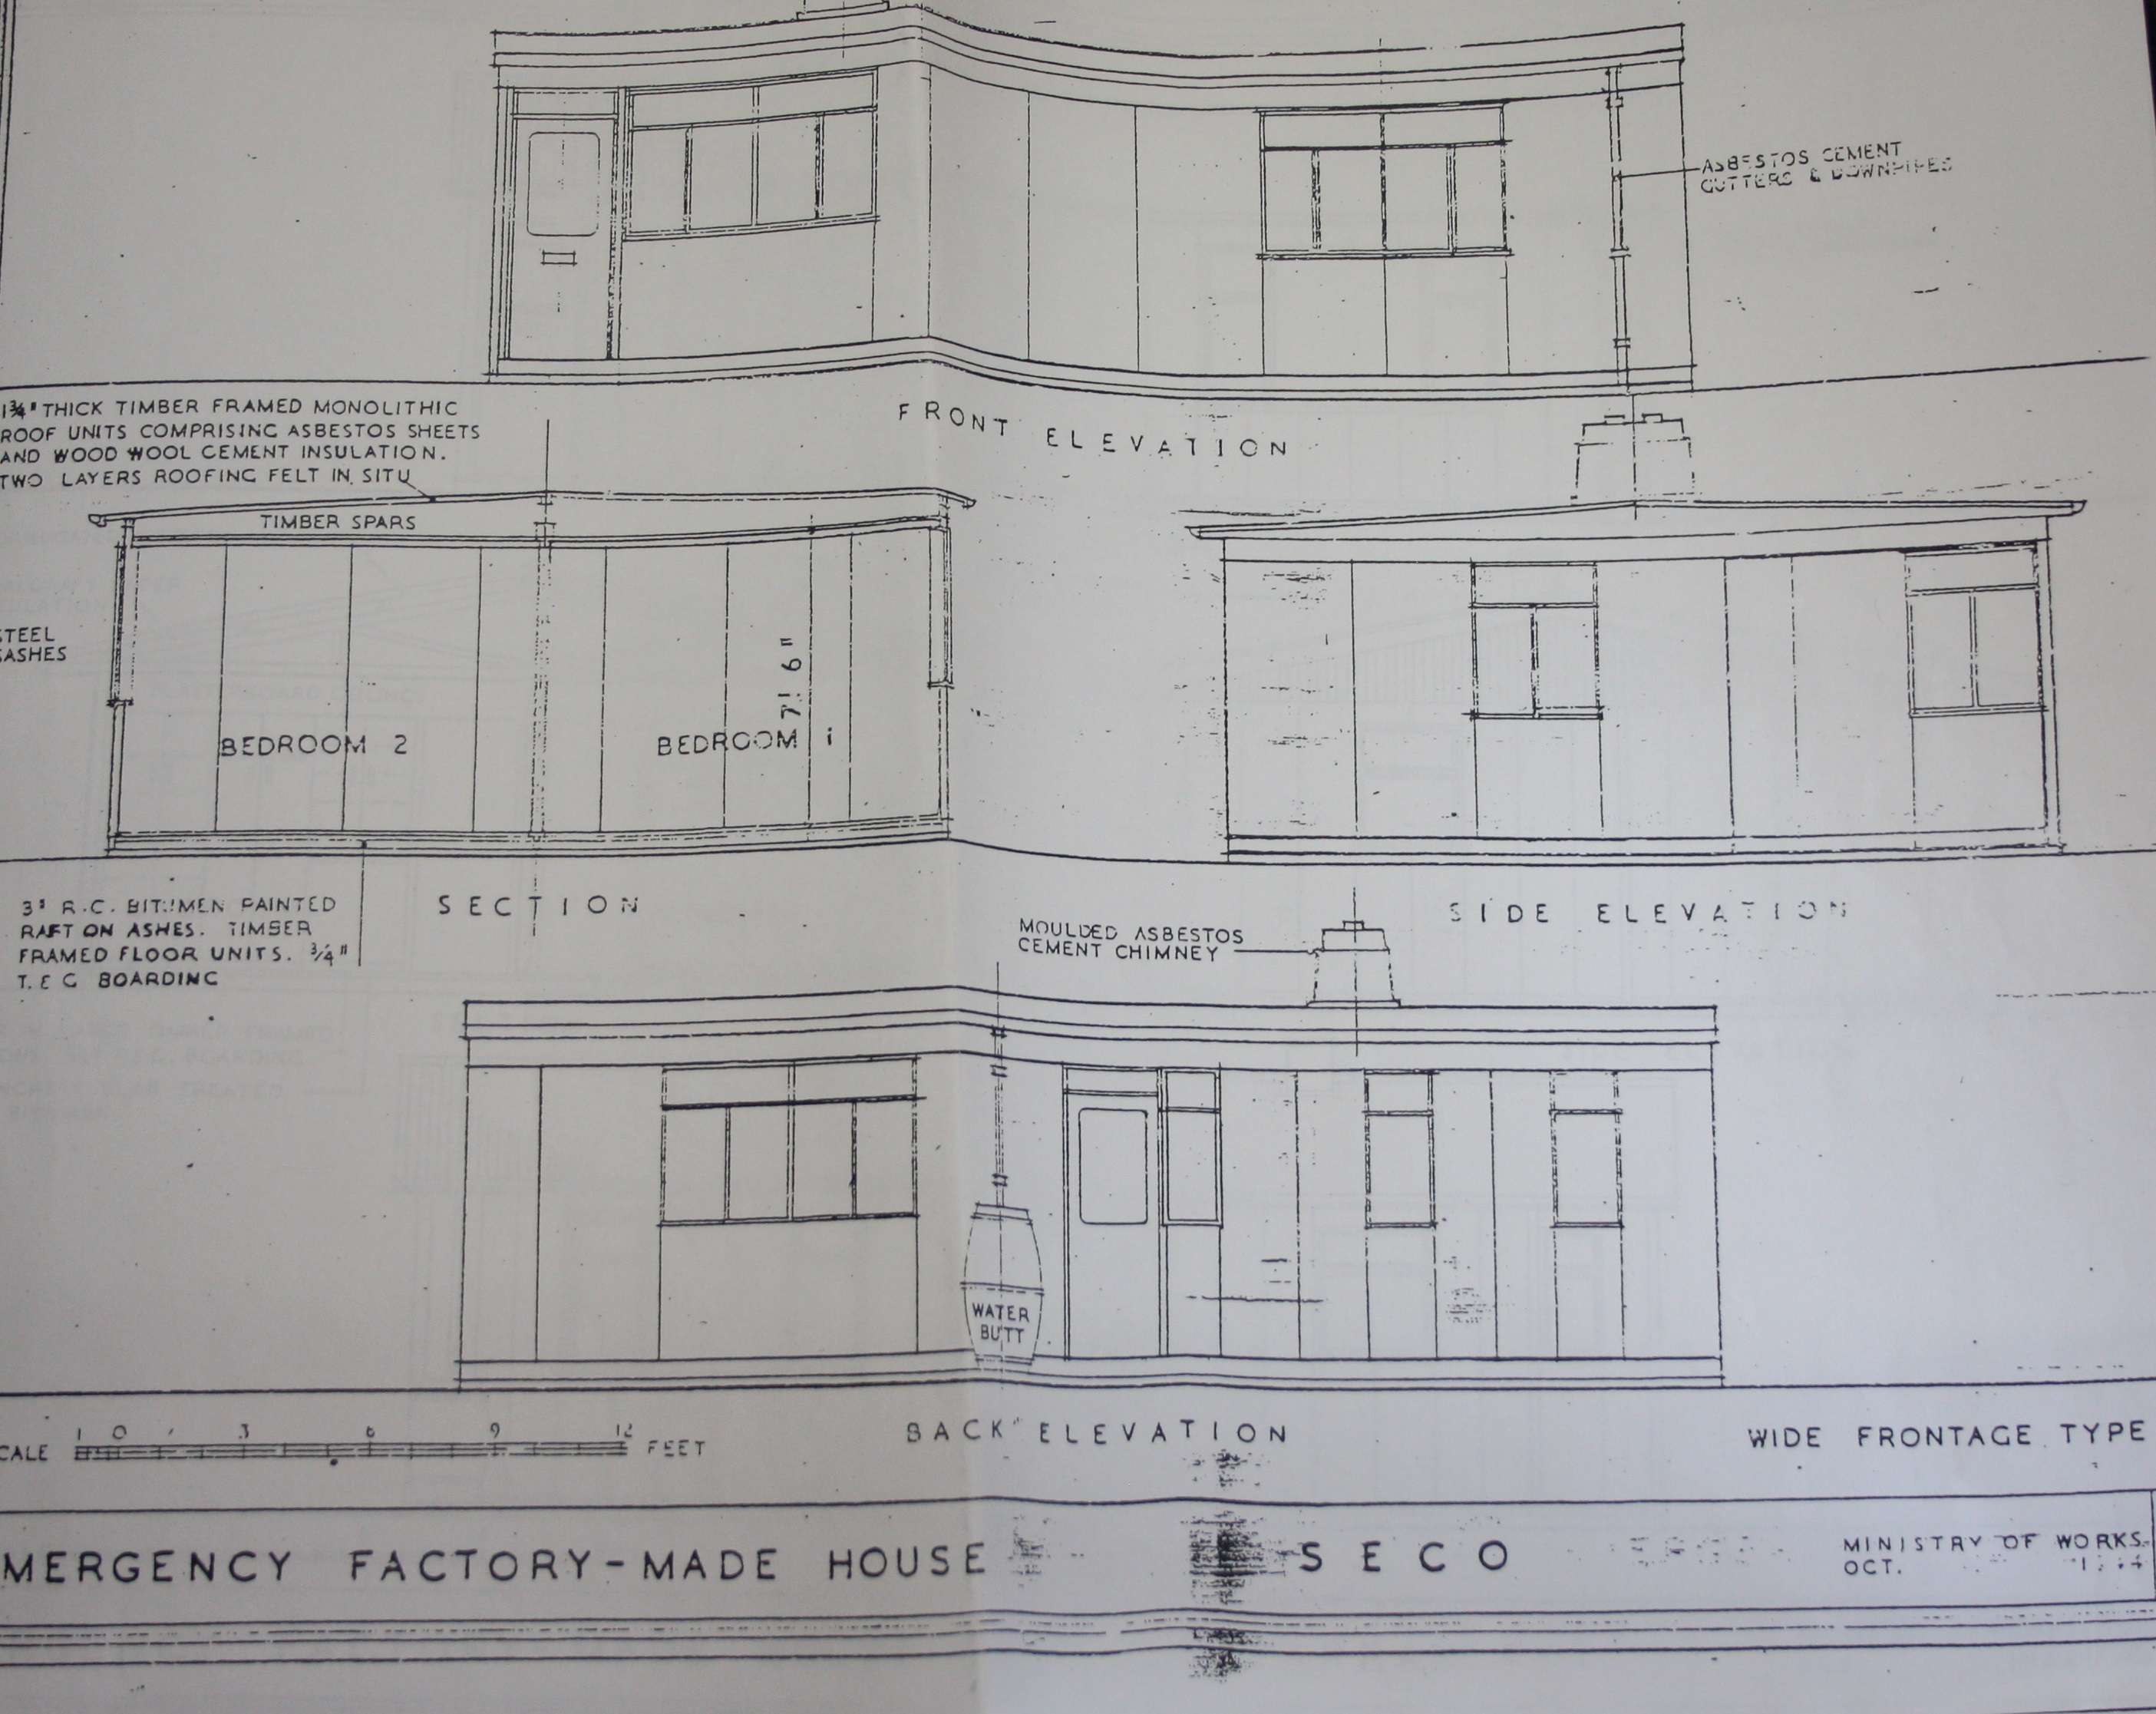 Emergency Factory Made House: Seco. Wide frontage type. Ministry of Works October 1944